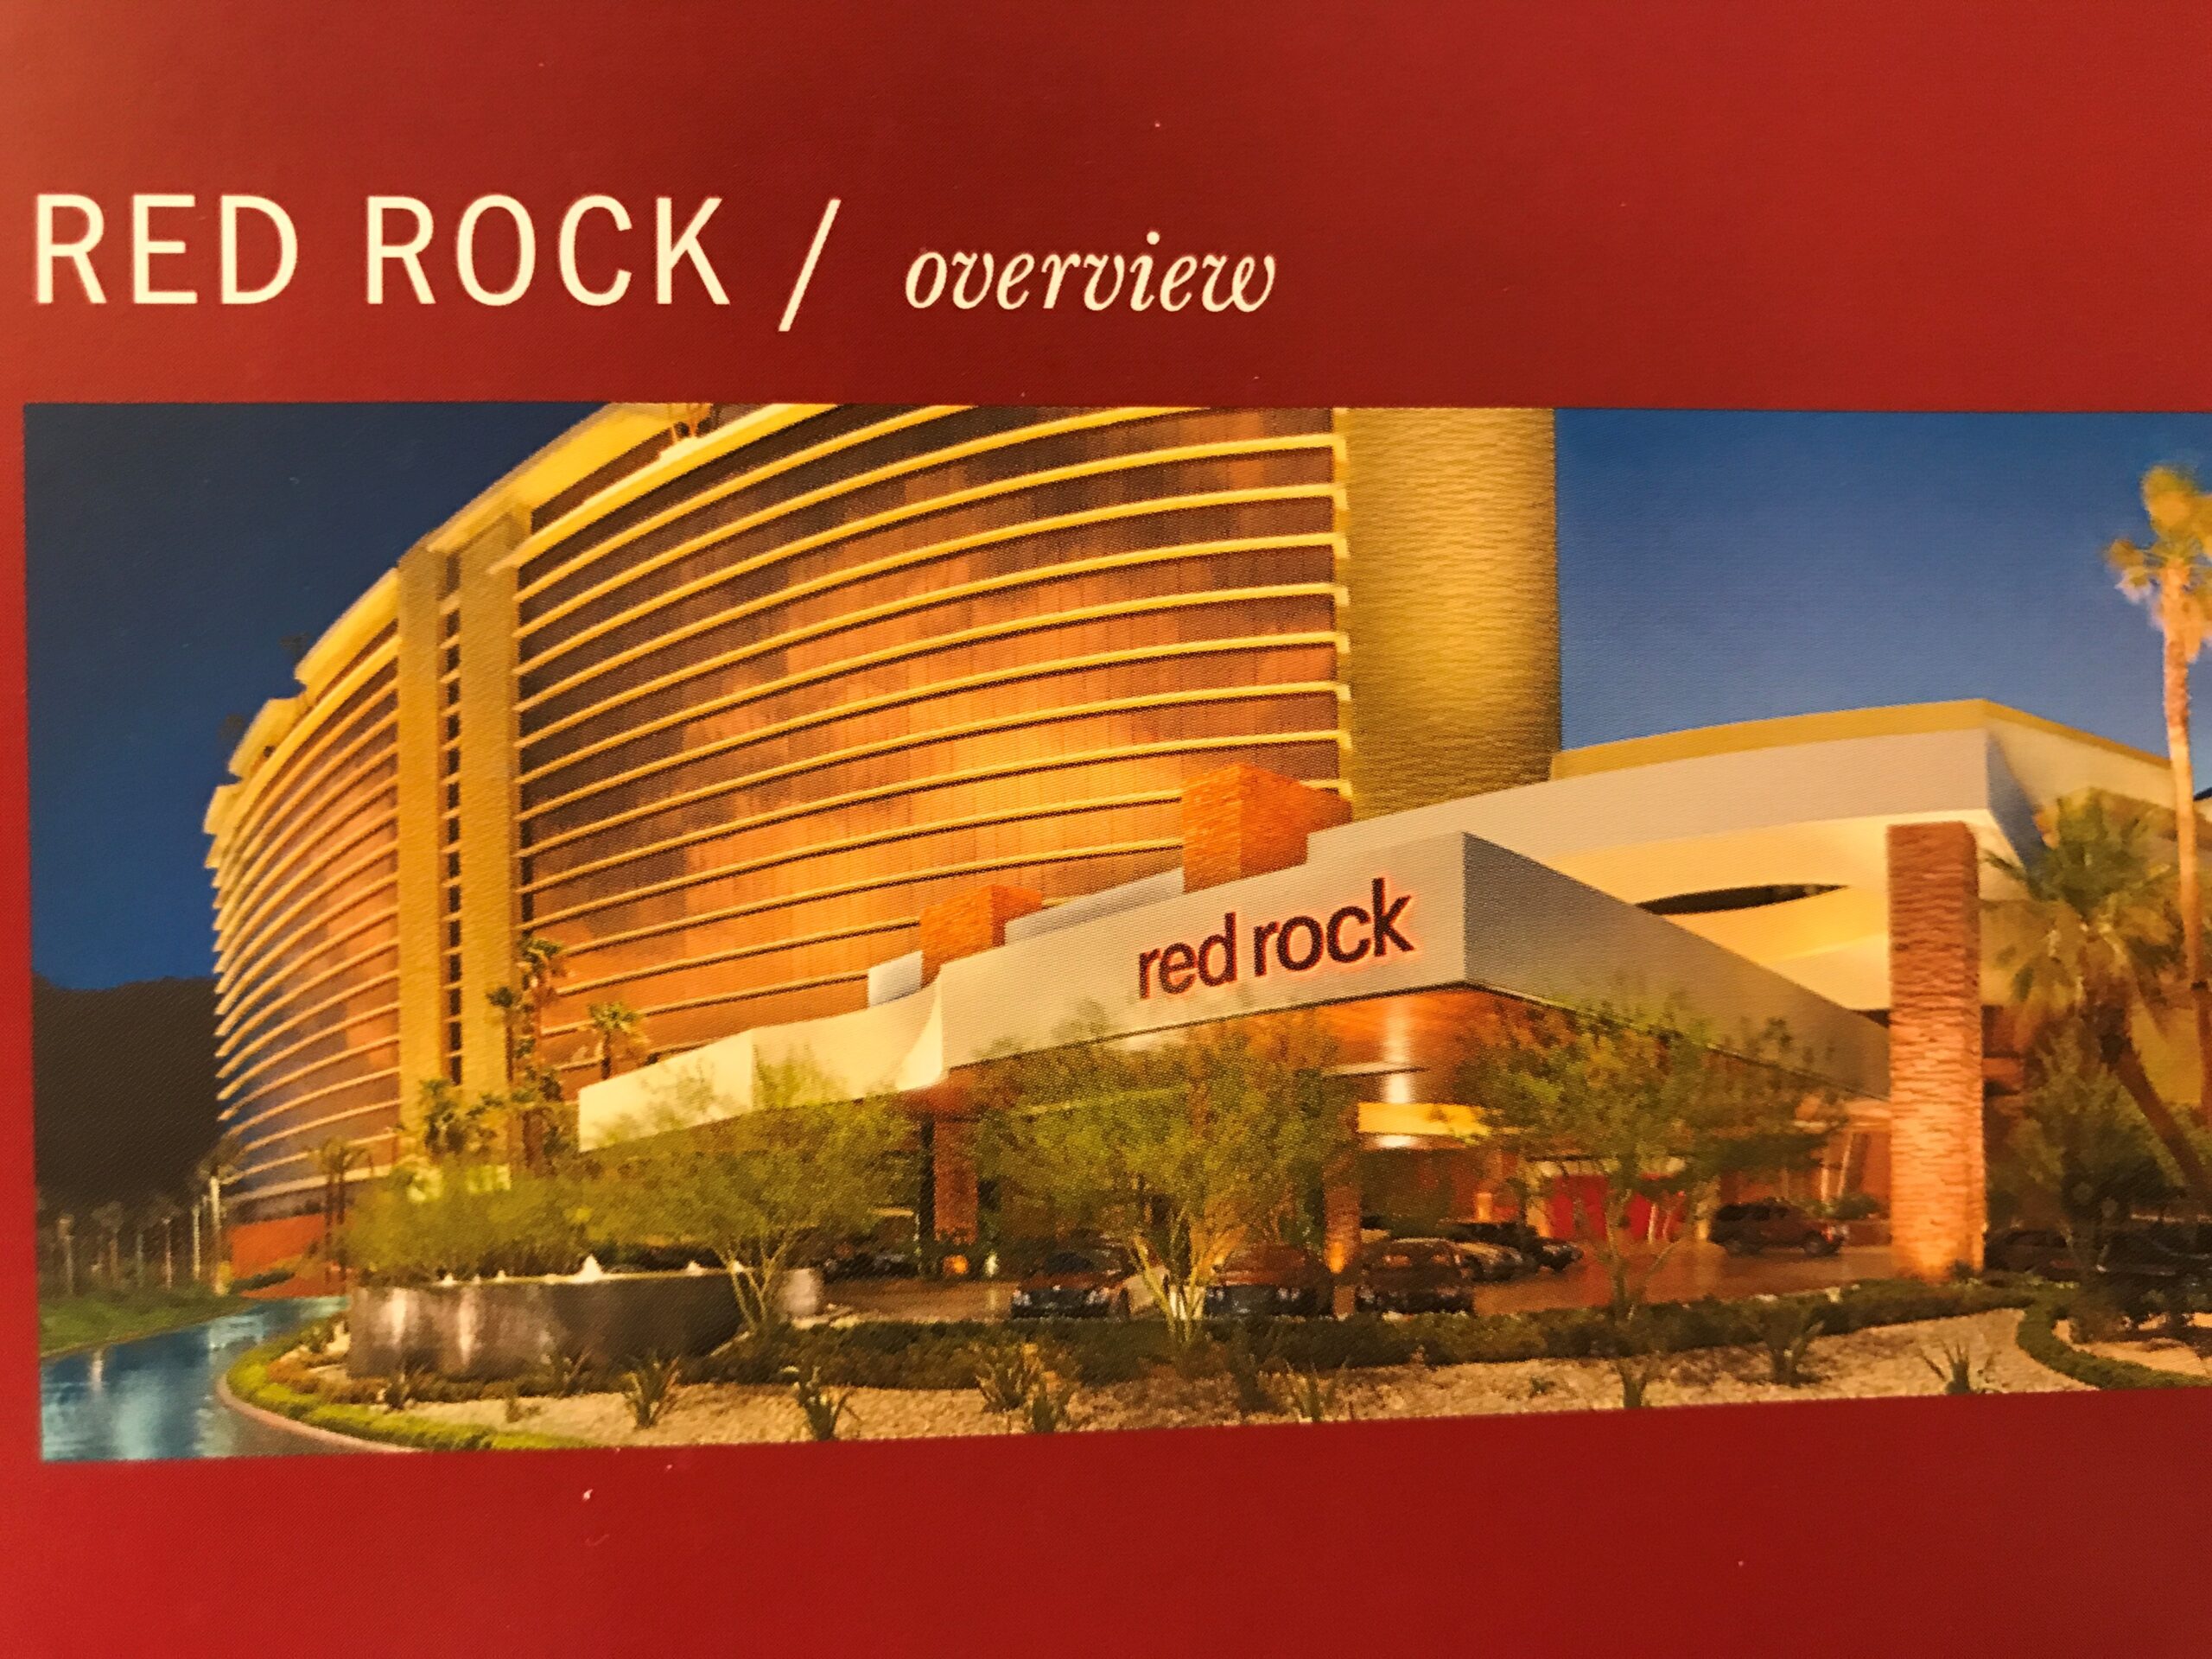 From promotional material image of the exterior of Red Rock Resort